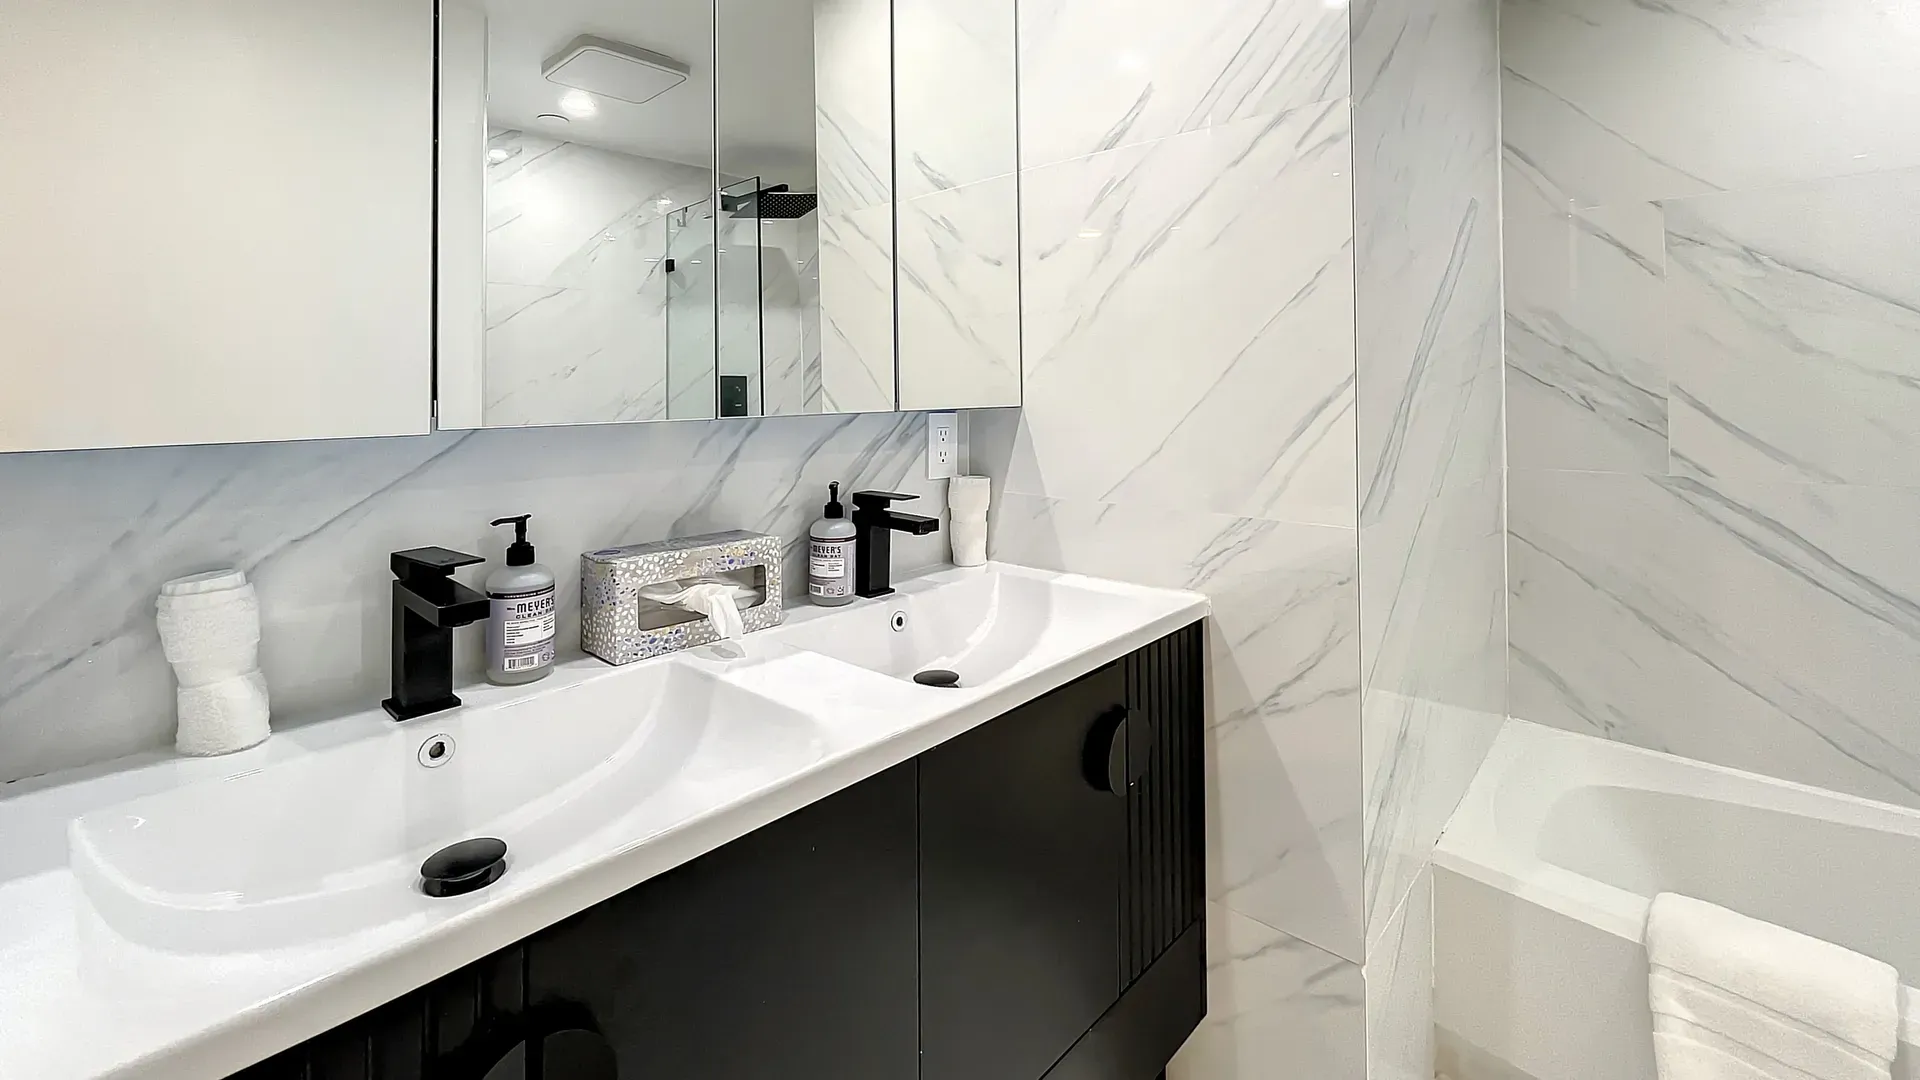 Double mirror wall cabinets offer ample storage space for guests to store their toiletries and personal items, helping to keep the bathroom organized and clutter-free. 